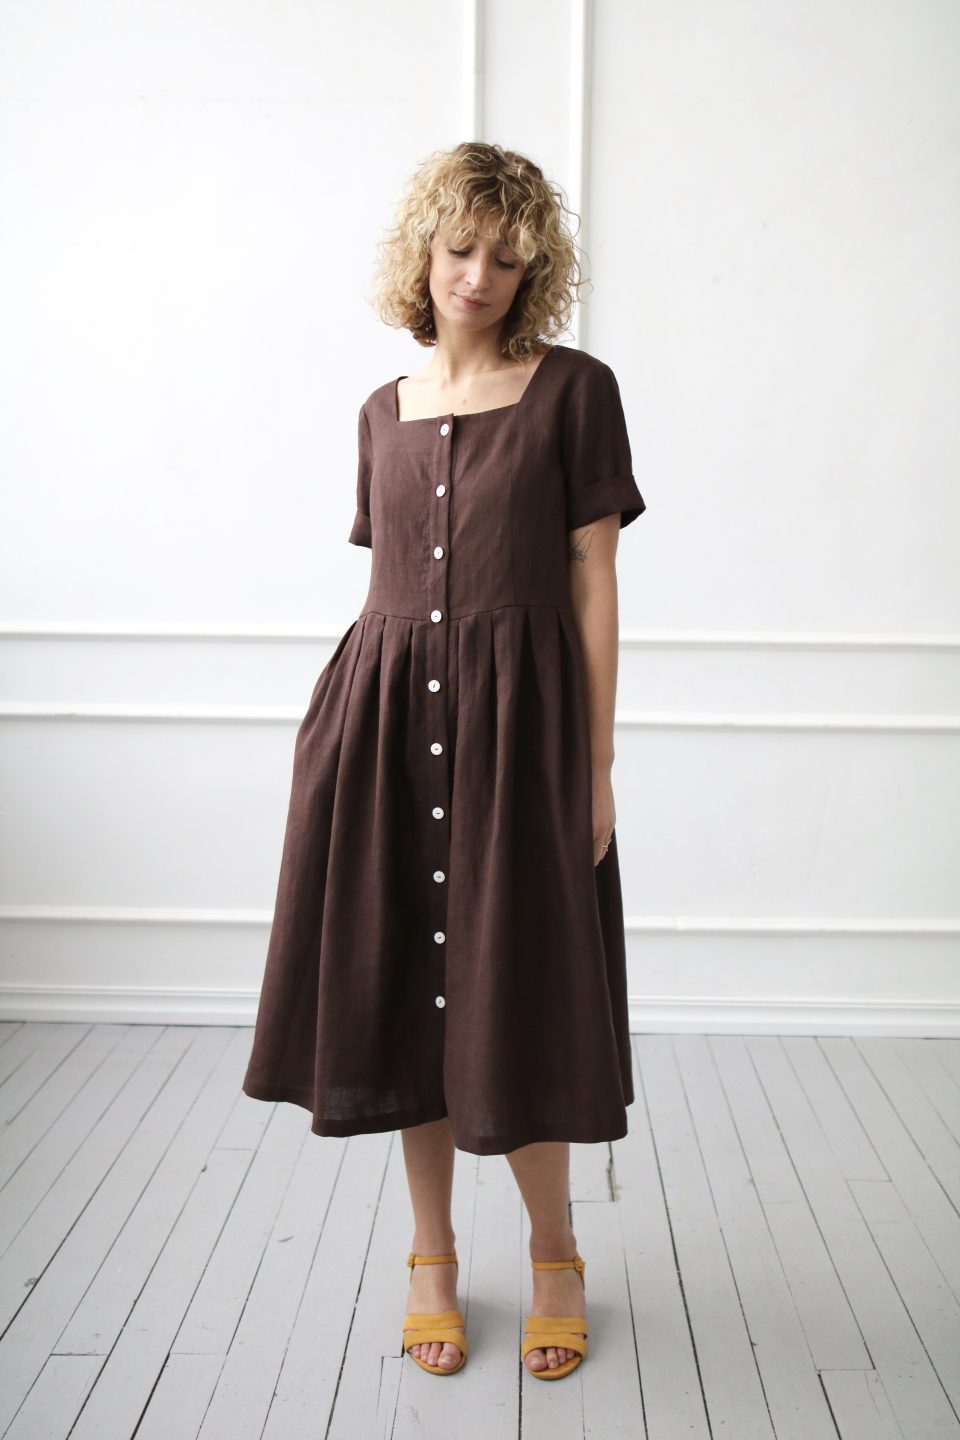 Linen pleated skirt dress | Dress | Sustainable clothing | OffOn clothing